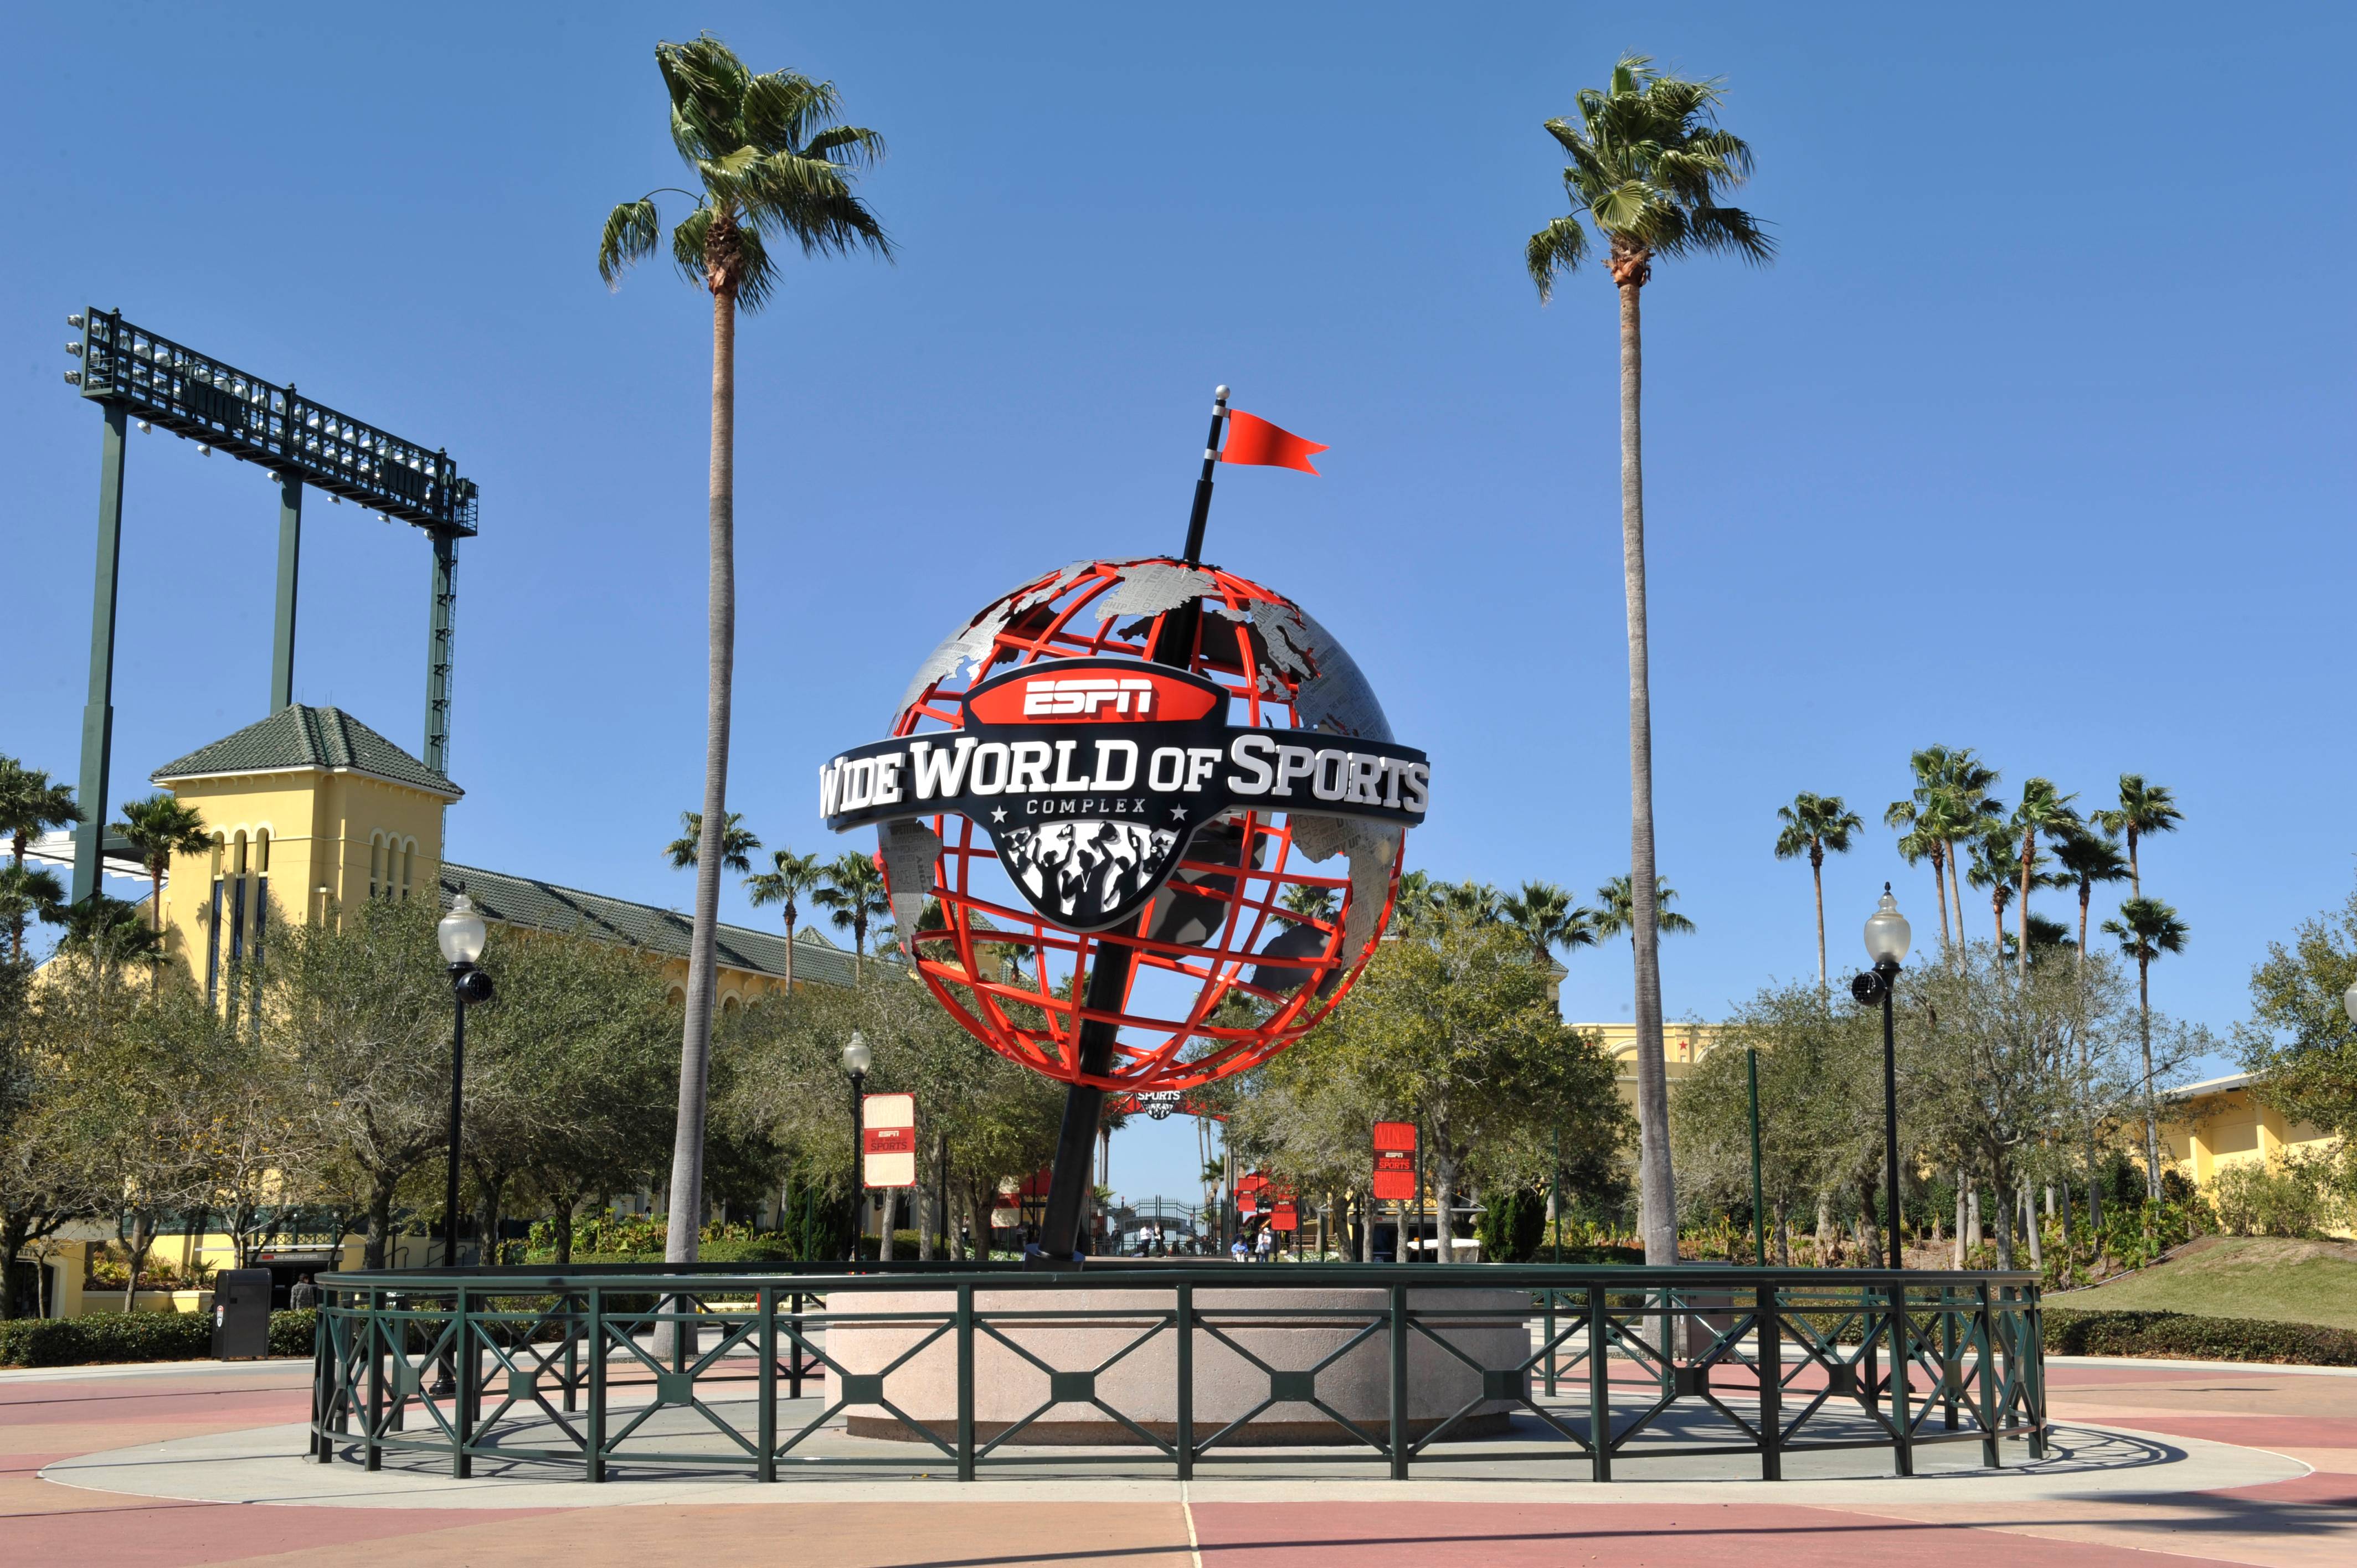 Disney officially announces expansion to ESPN Wide World of Sports with 8000 seater venue aimed at cheerleading and dance events